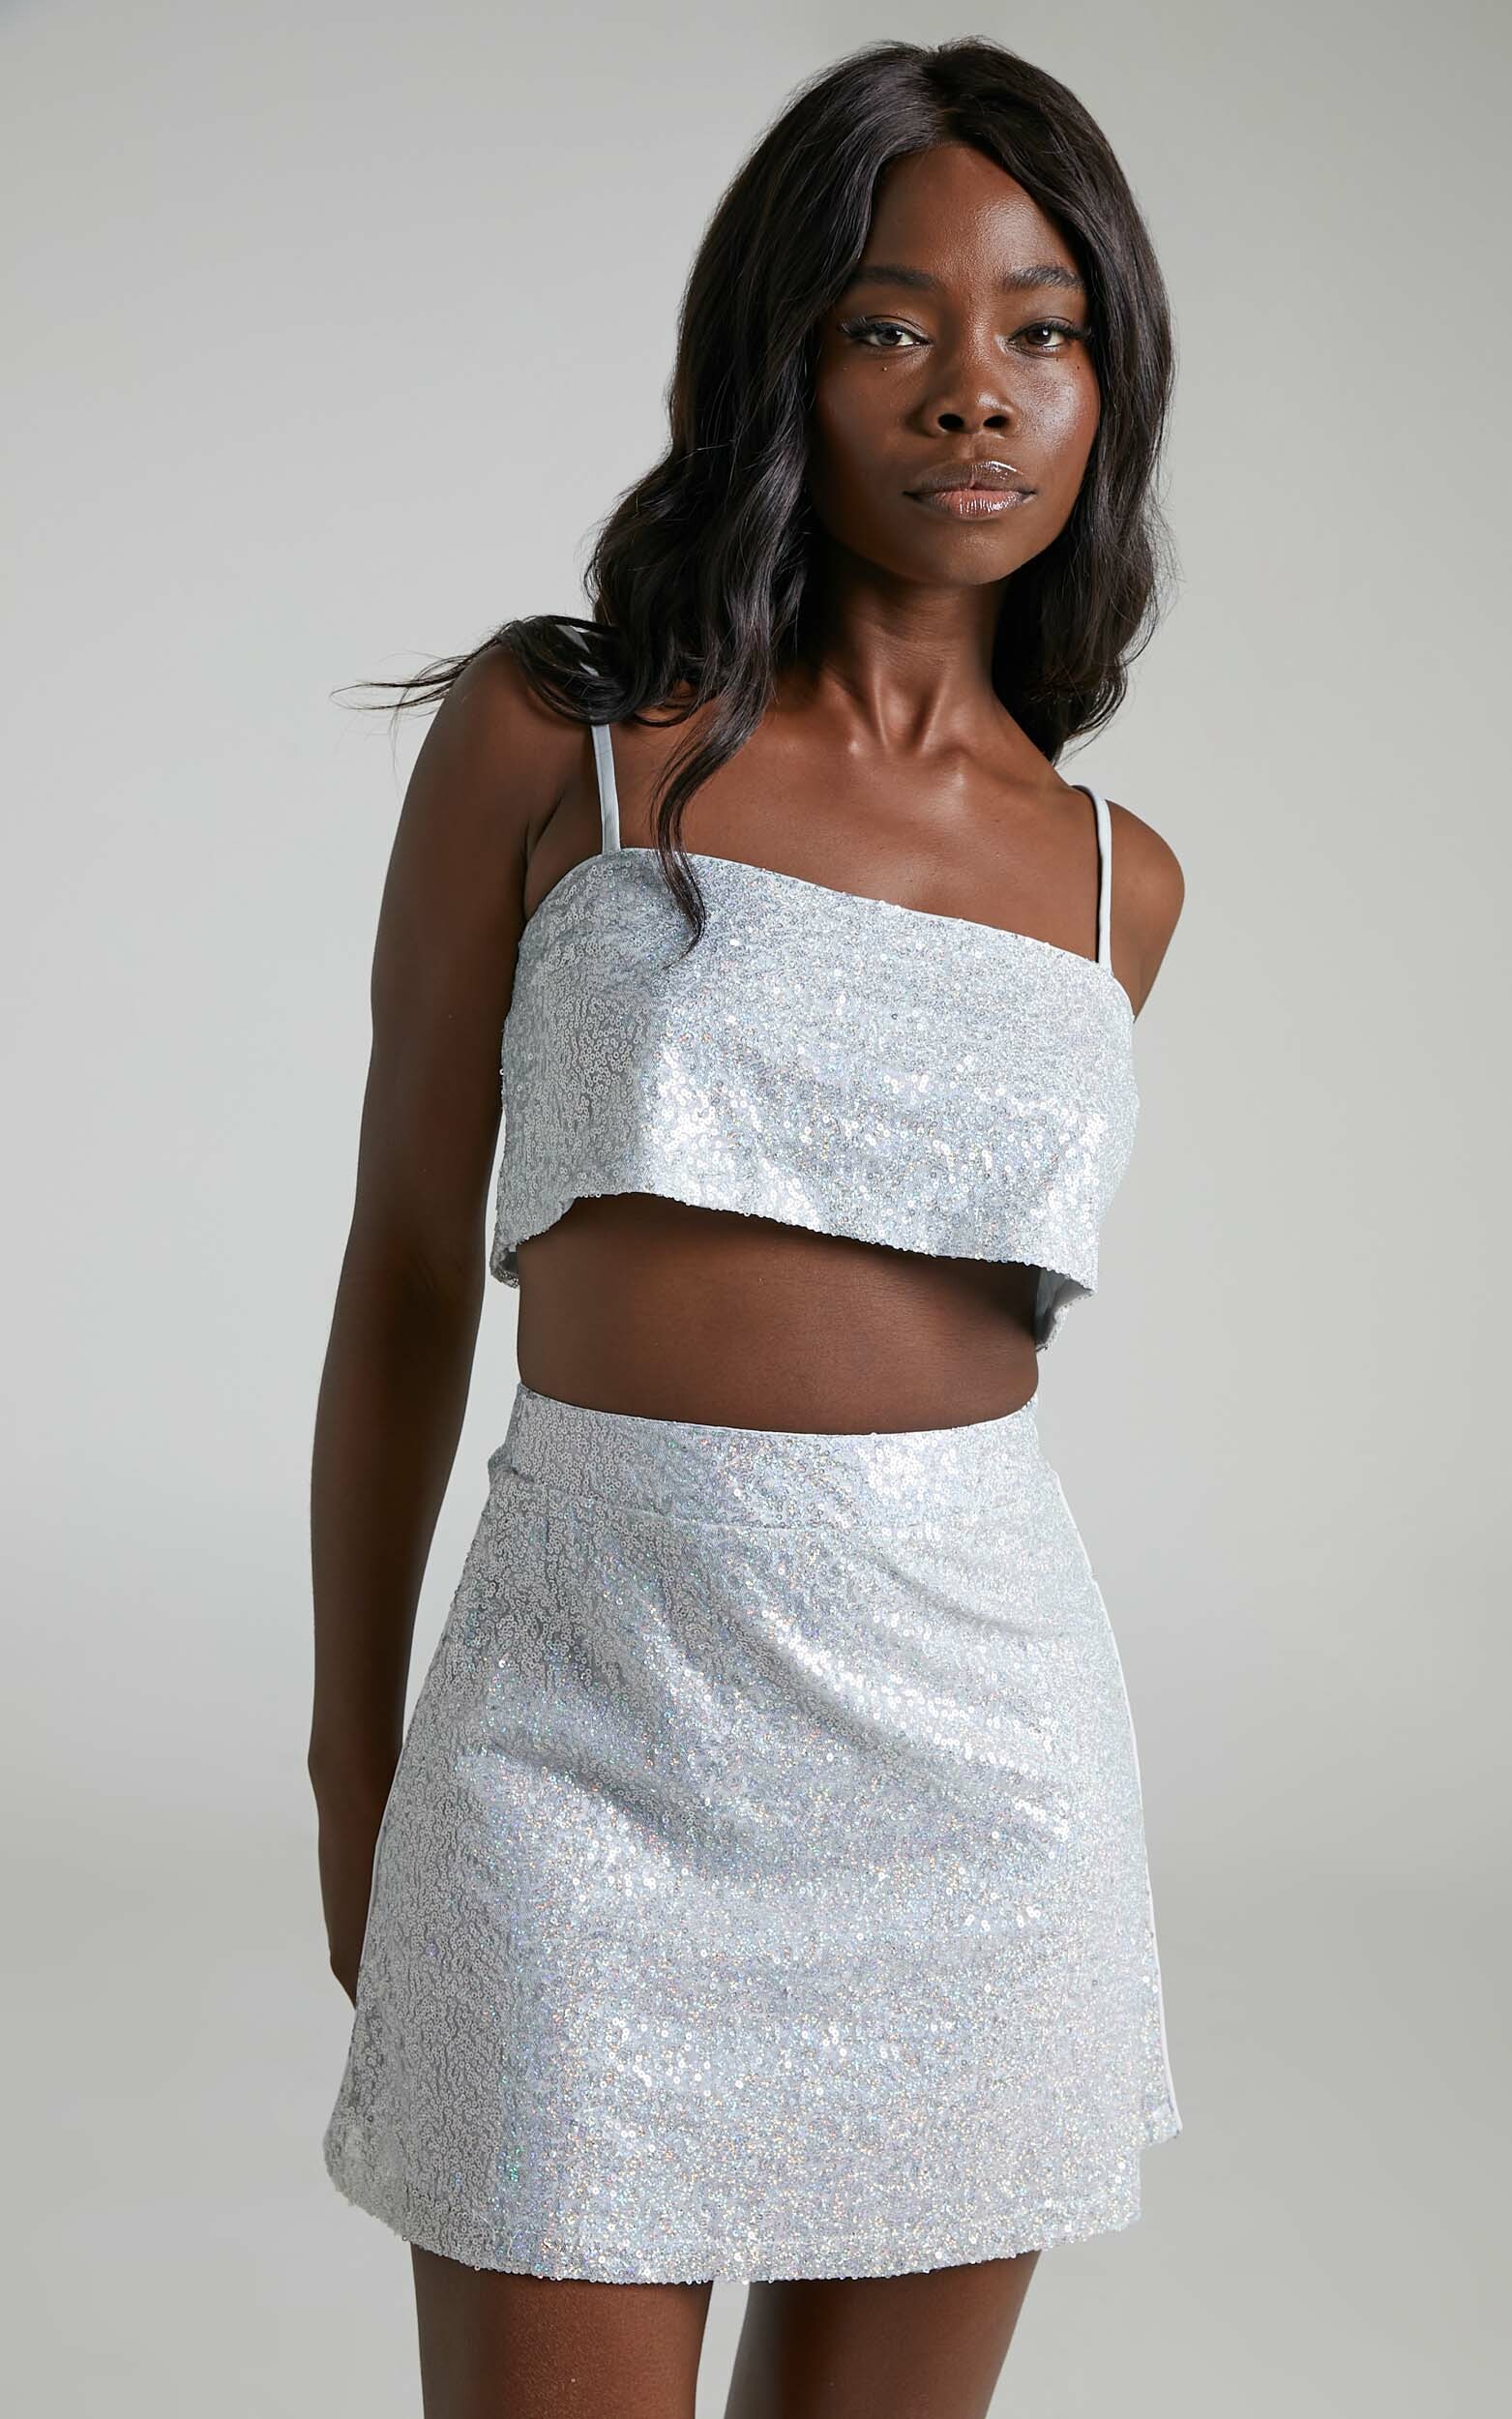 Elswyth Strappy Sequin Crop Top in Silver - 06, SLV2, hi-res image number null